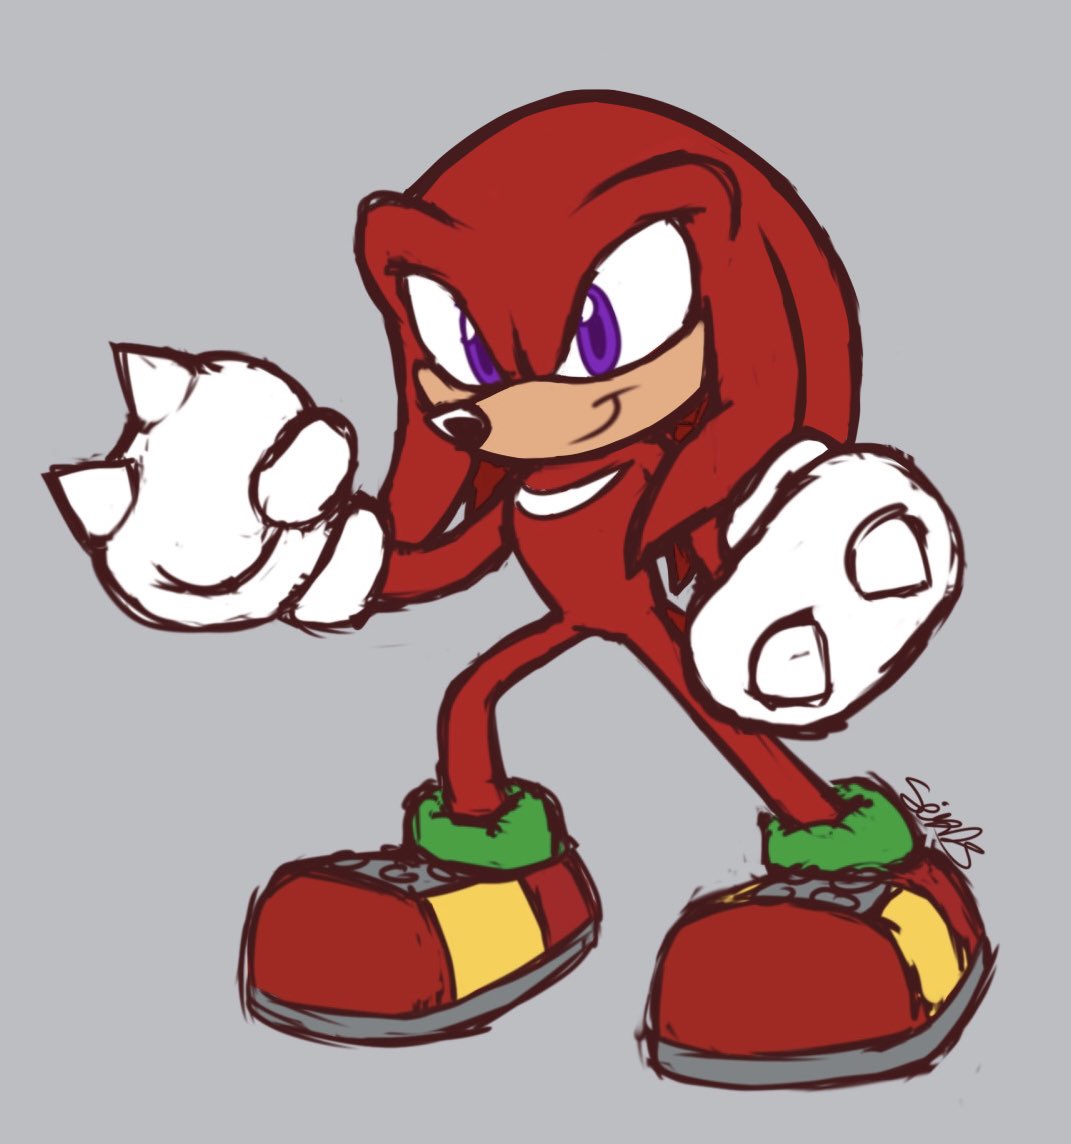 fixed up and old Knuckles doodle

#SonicTheHedgehog #KnucklesTheEchidna #SonicTheHedgehogfanart #sonicfanart